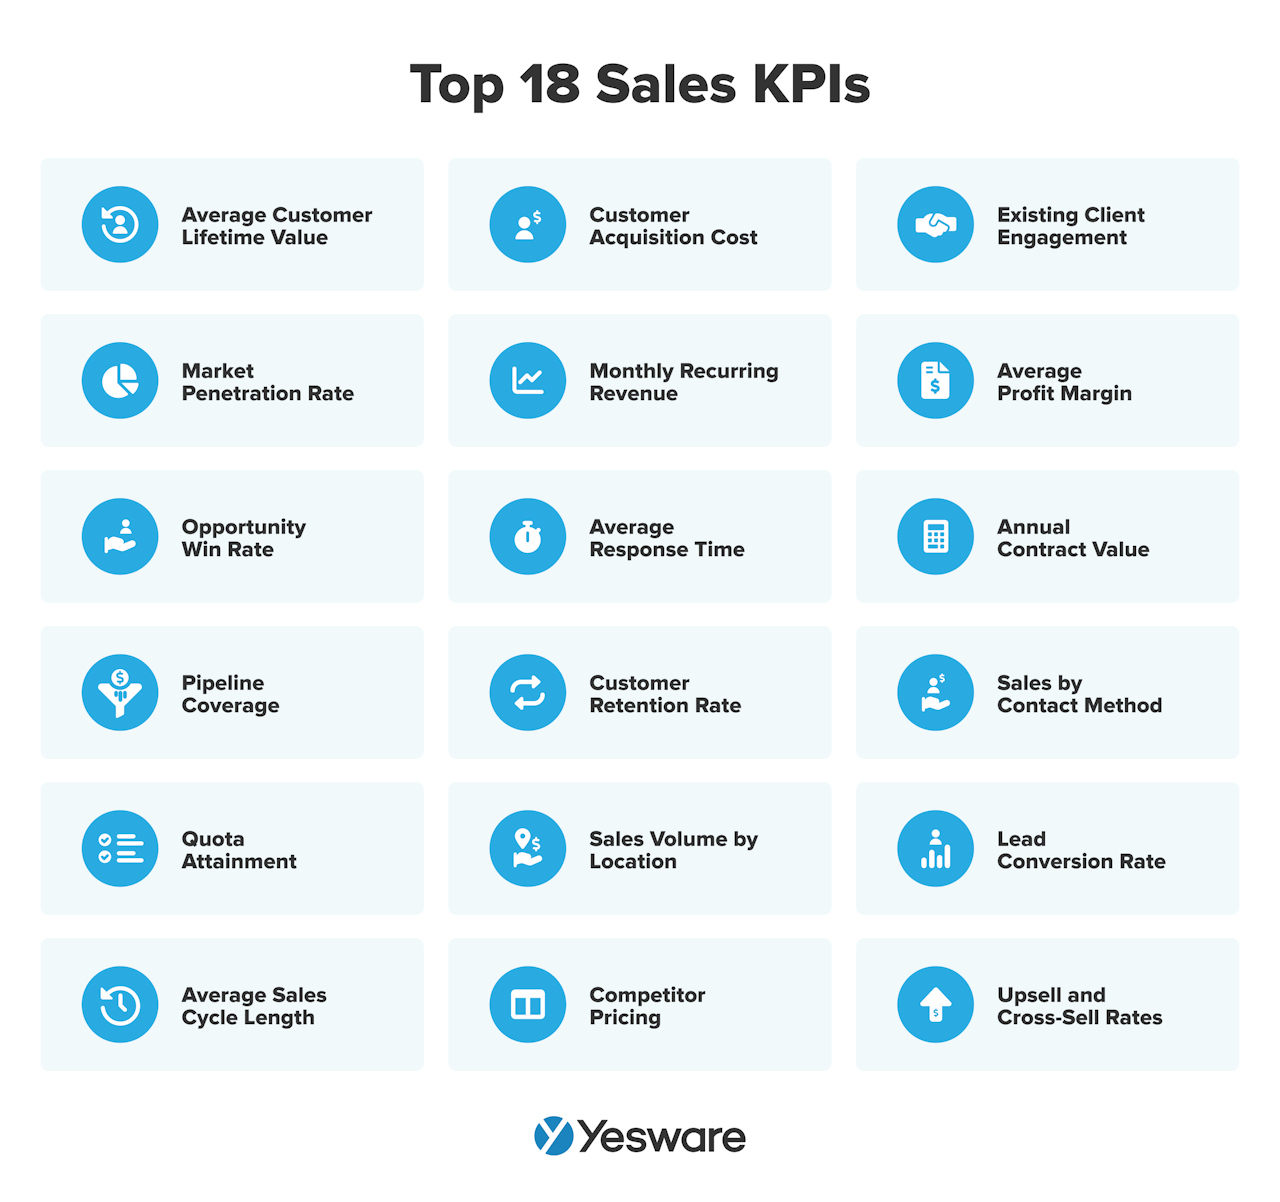 sales planning: monitor and analyze your sales KPIs